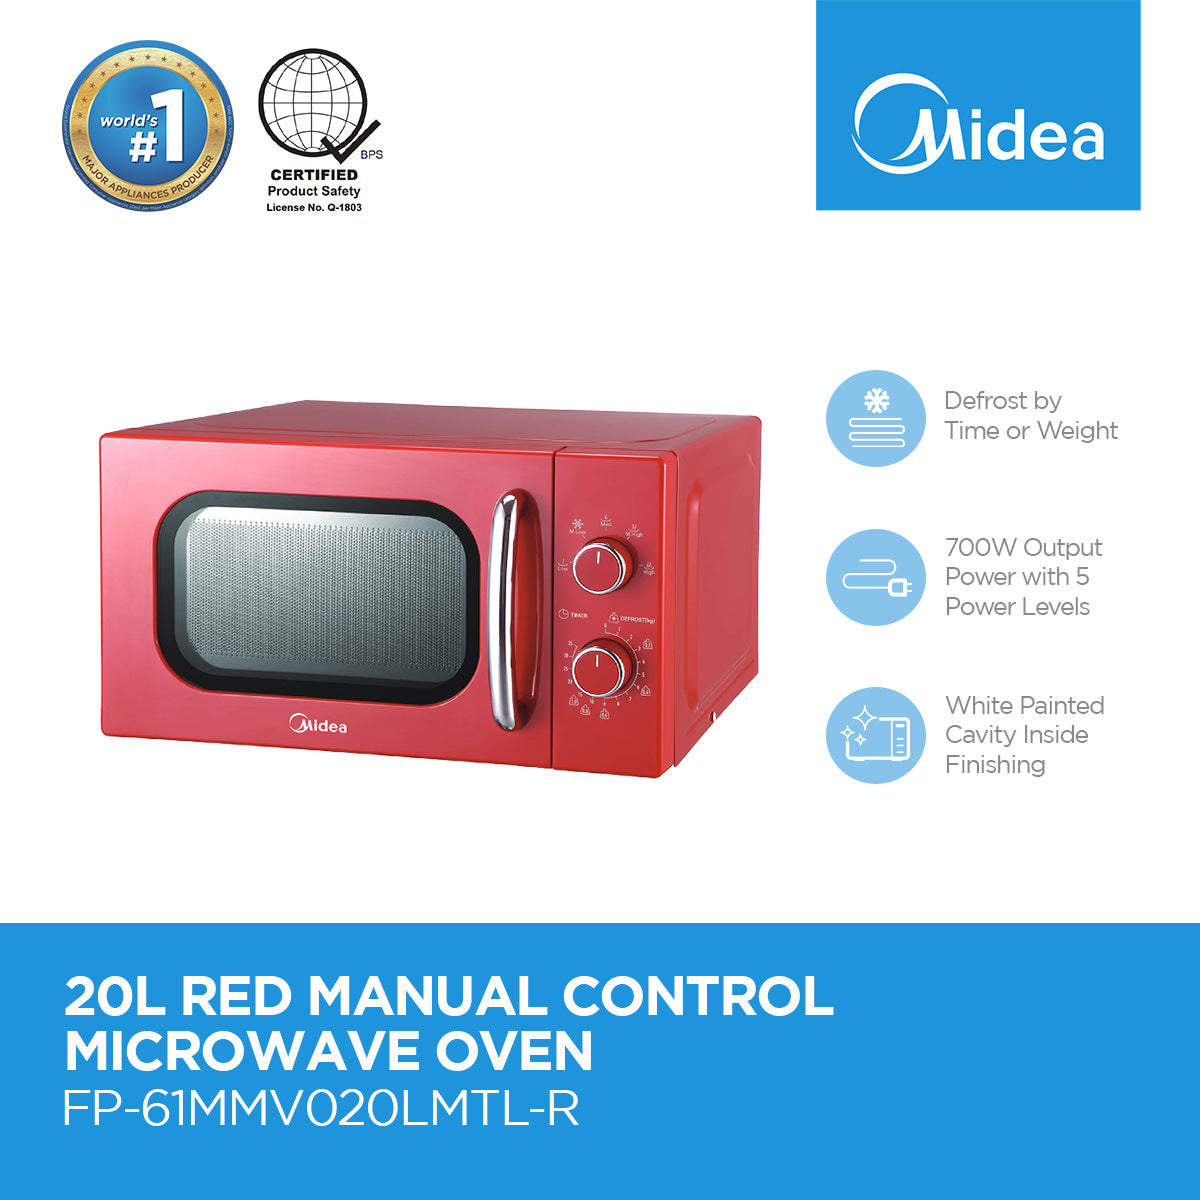 Midea 20L Red Manual Control Microwave Oven